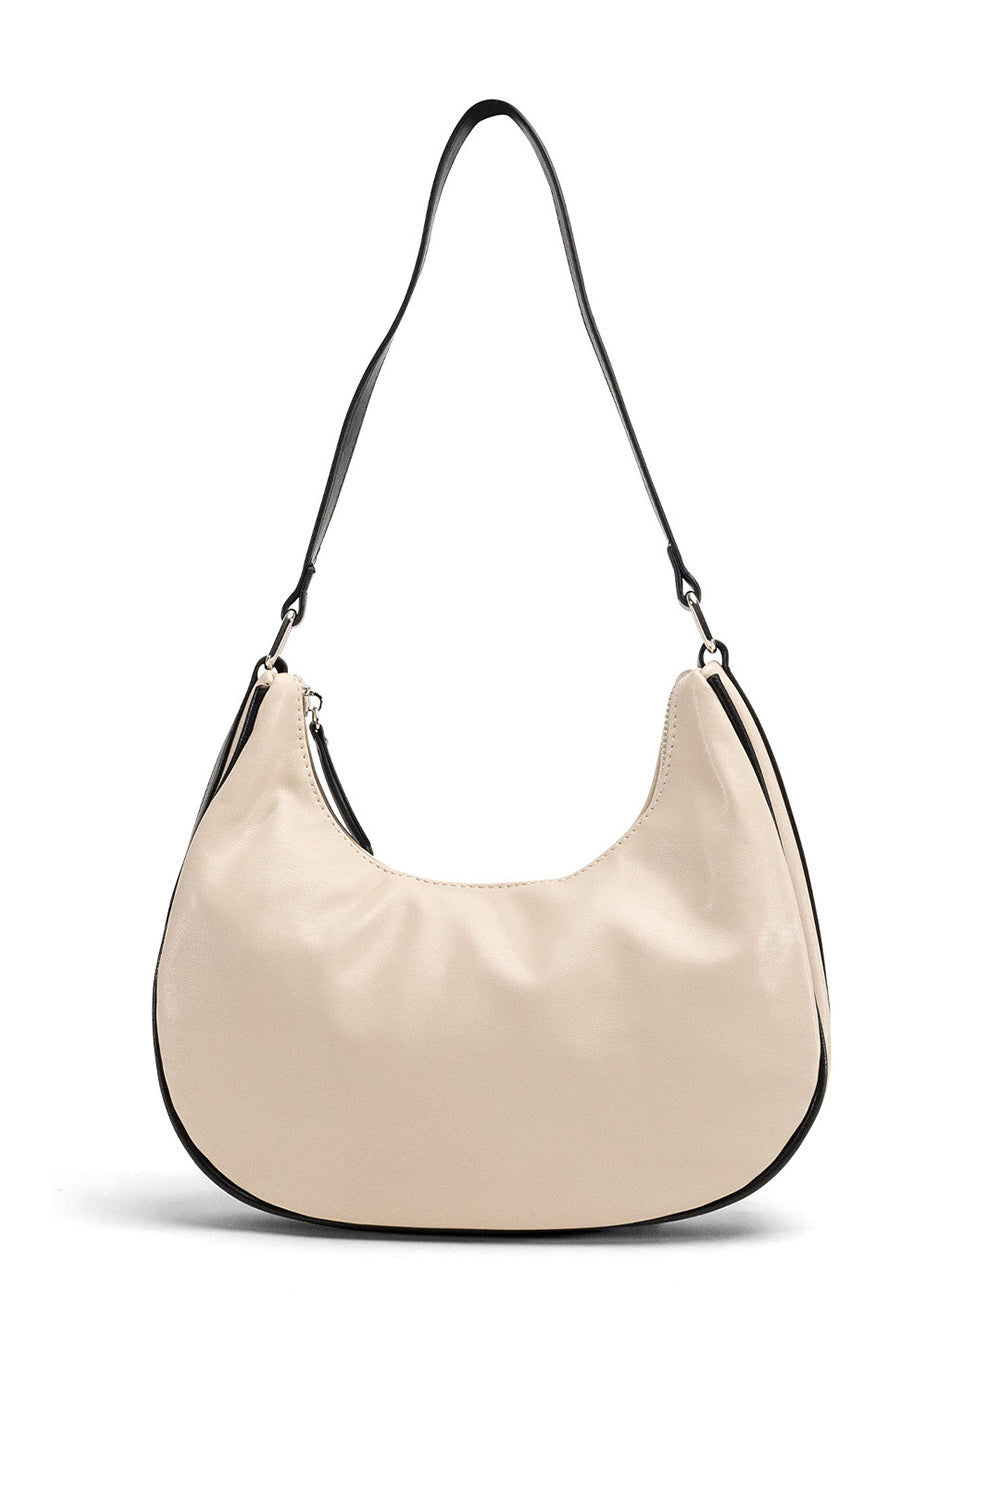 My Accessories London Curved Shoulder Bag in Beige and Black | Women's Accessories